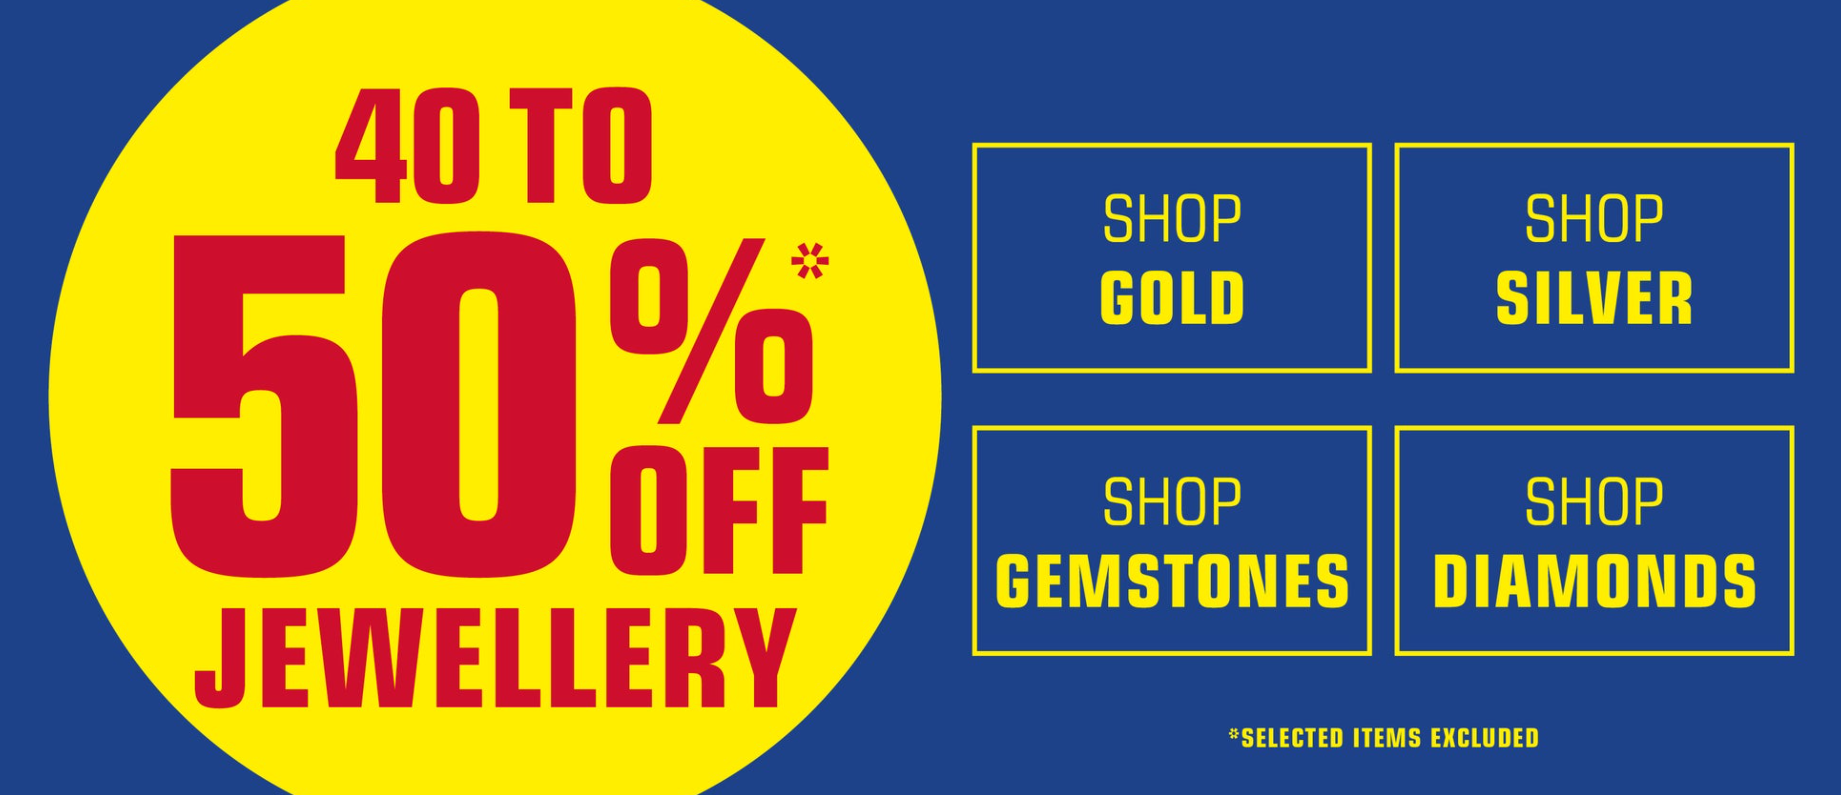 Prouds Boxing Day sale 40-50% OFF jewellery including gold, silver, gemstones, diamonds